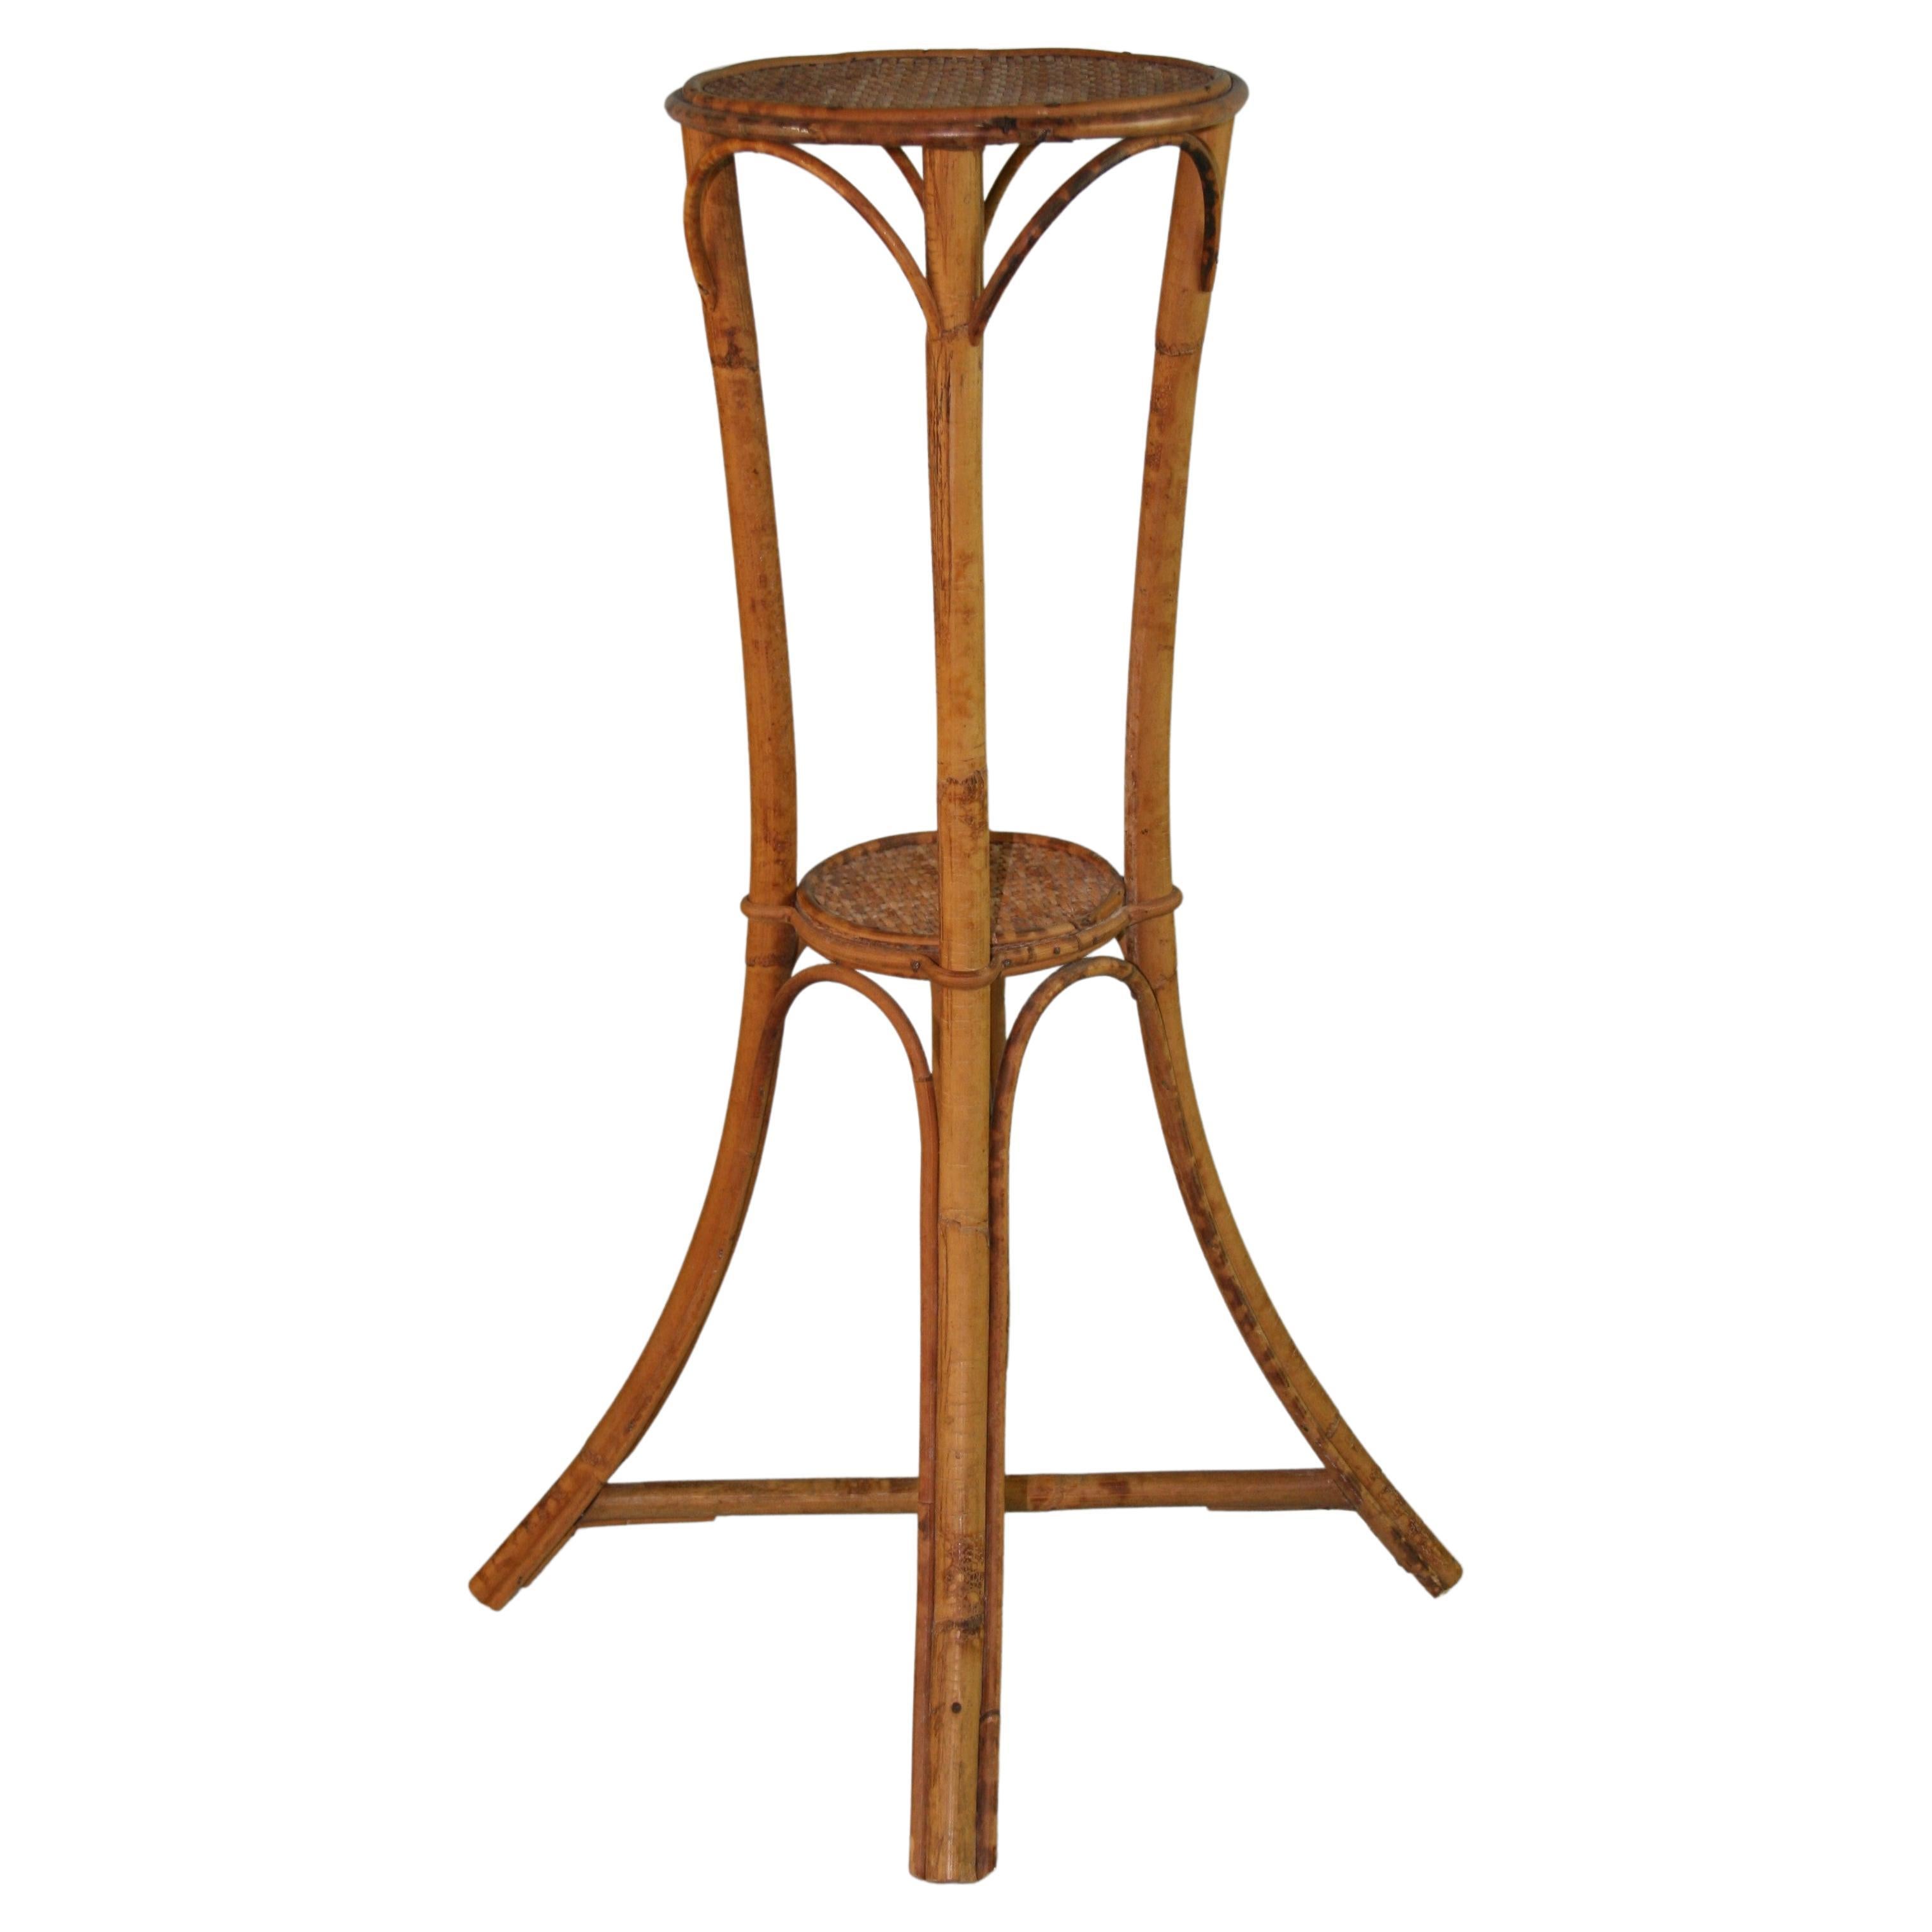 1388 Bent Rattan and bamboo plant stand
Top diameter 8